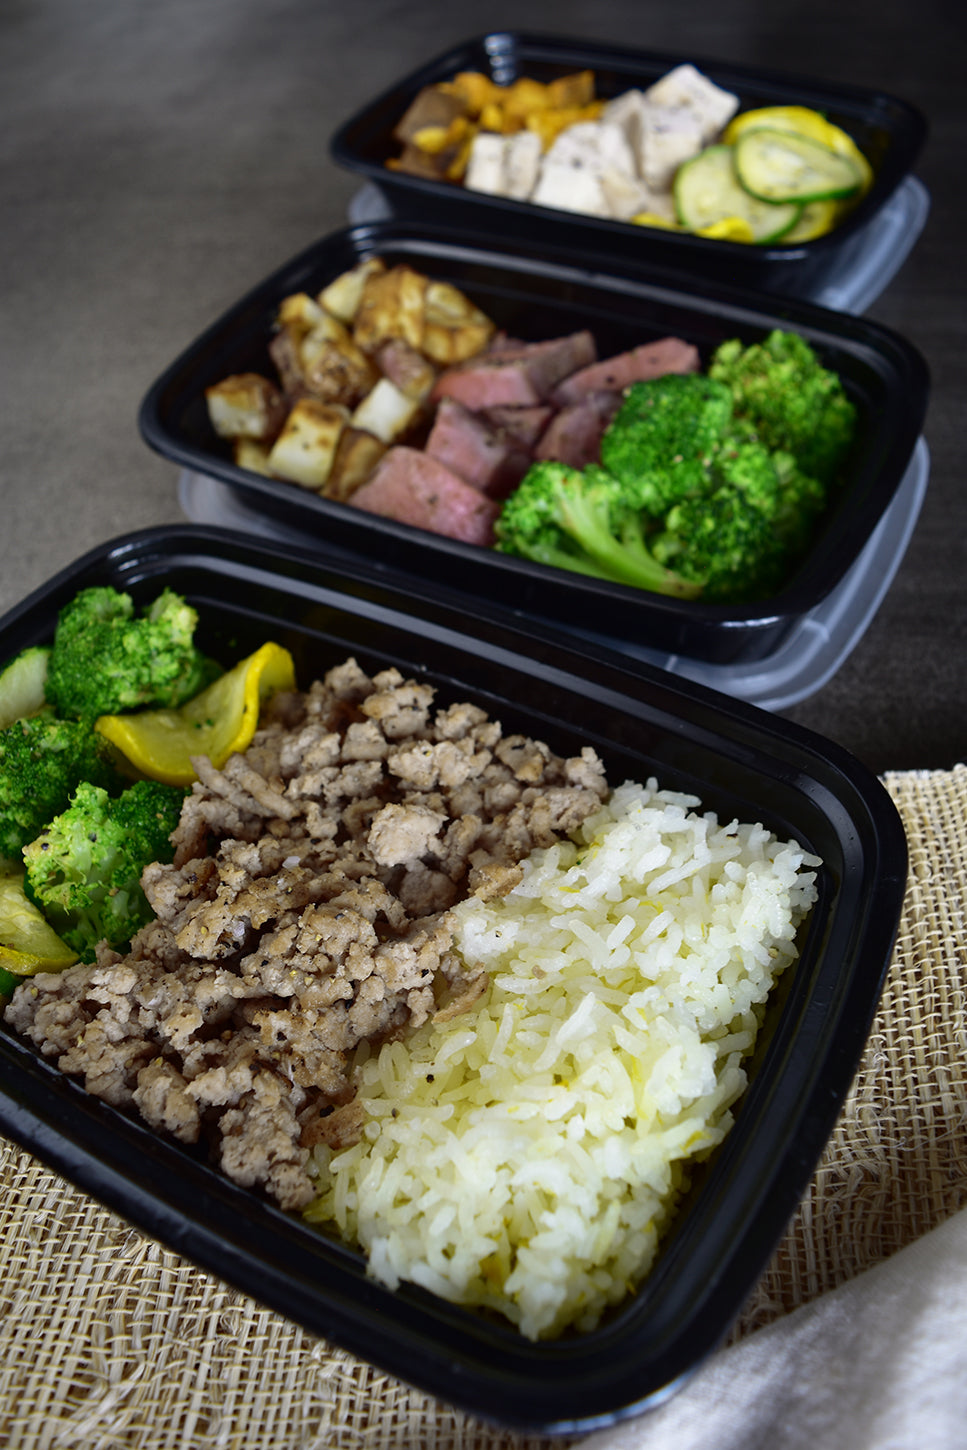 4 Strategies for Successful Meal Prep